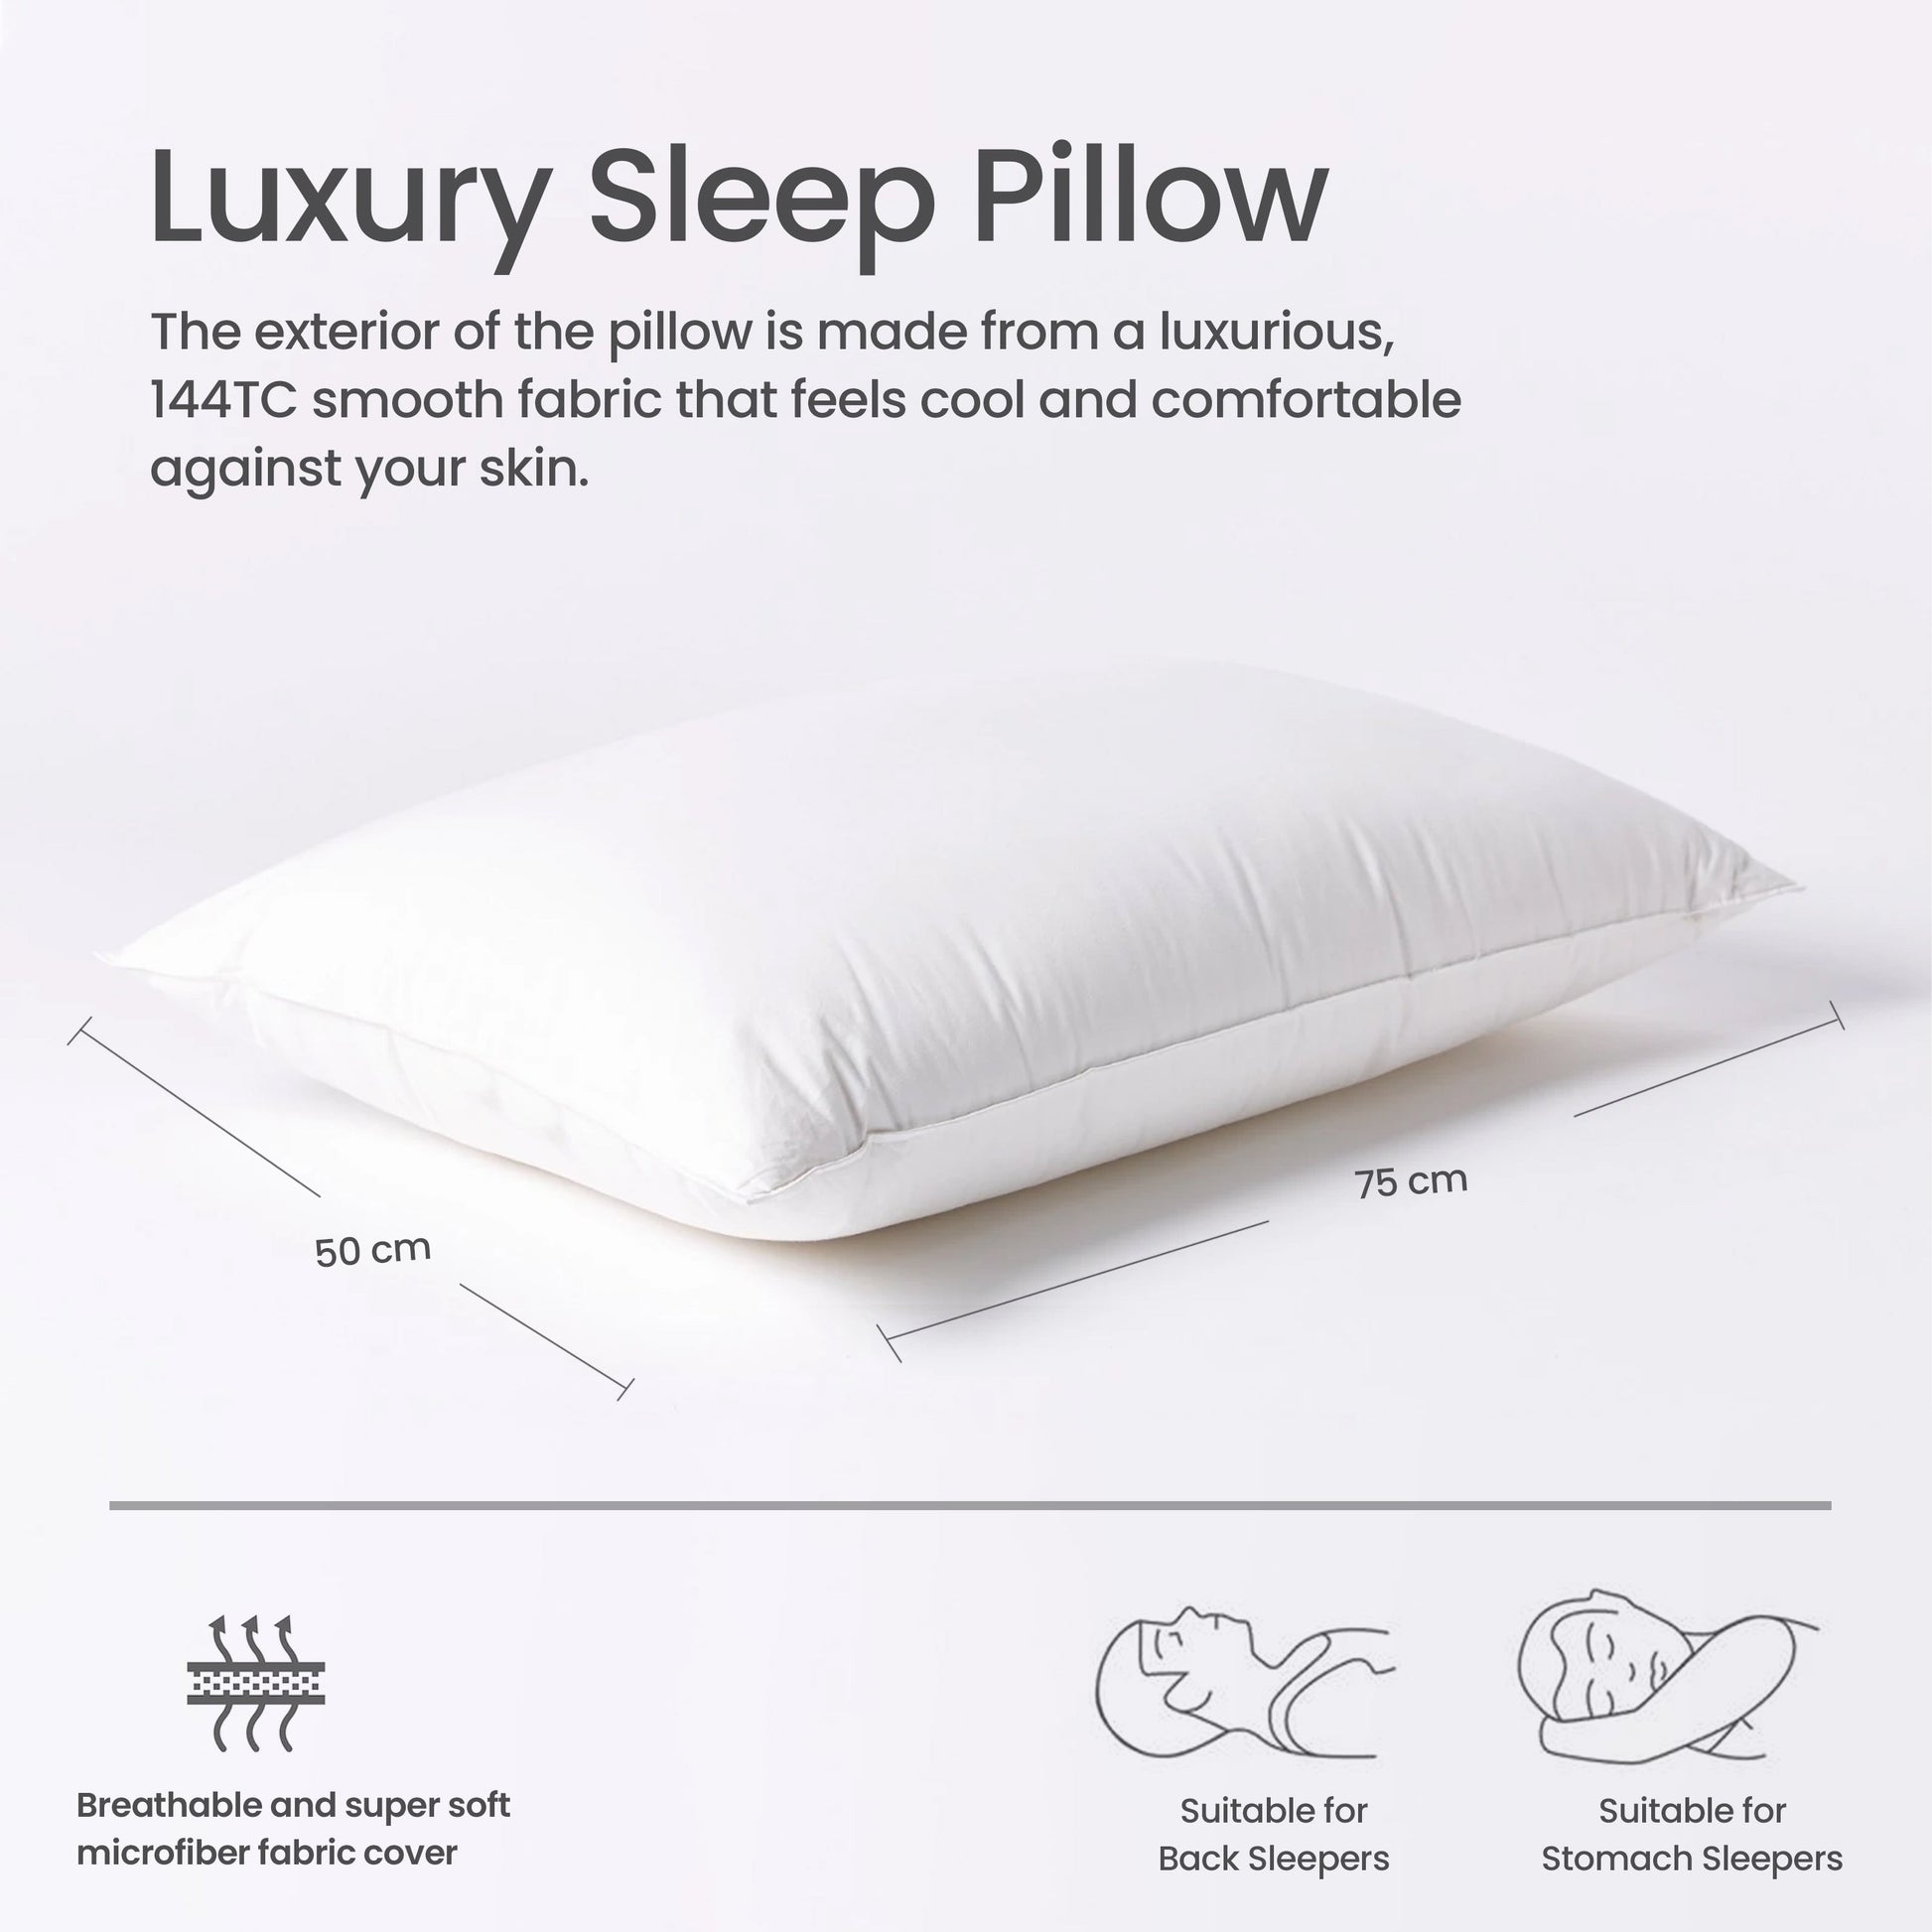 Exquisite Sleep Pillow Pack of 2 Standard Size 50x75cm with Self Cord for Ultimate Support Ergonomically designed for Side Sleepers 900g